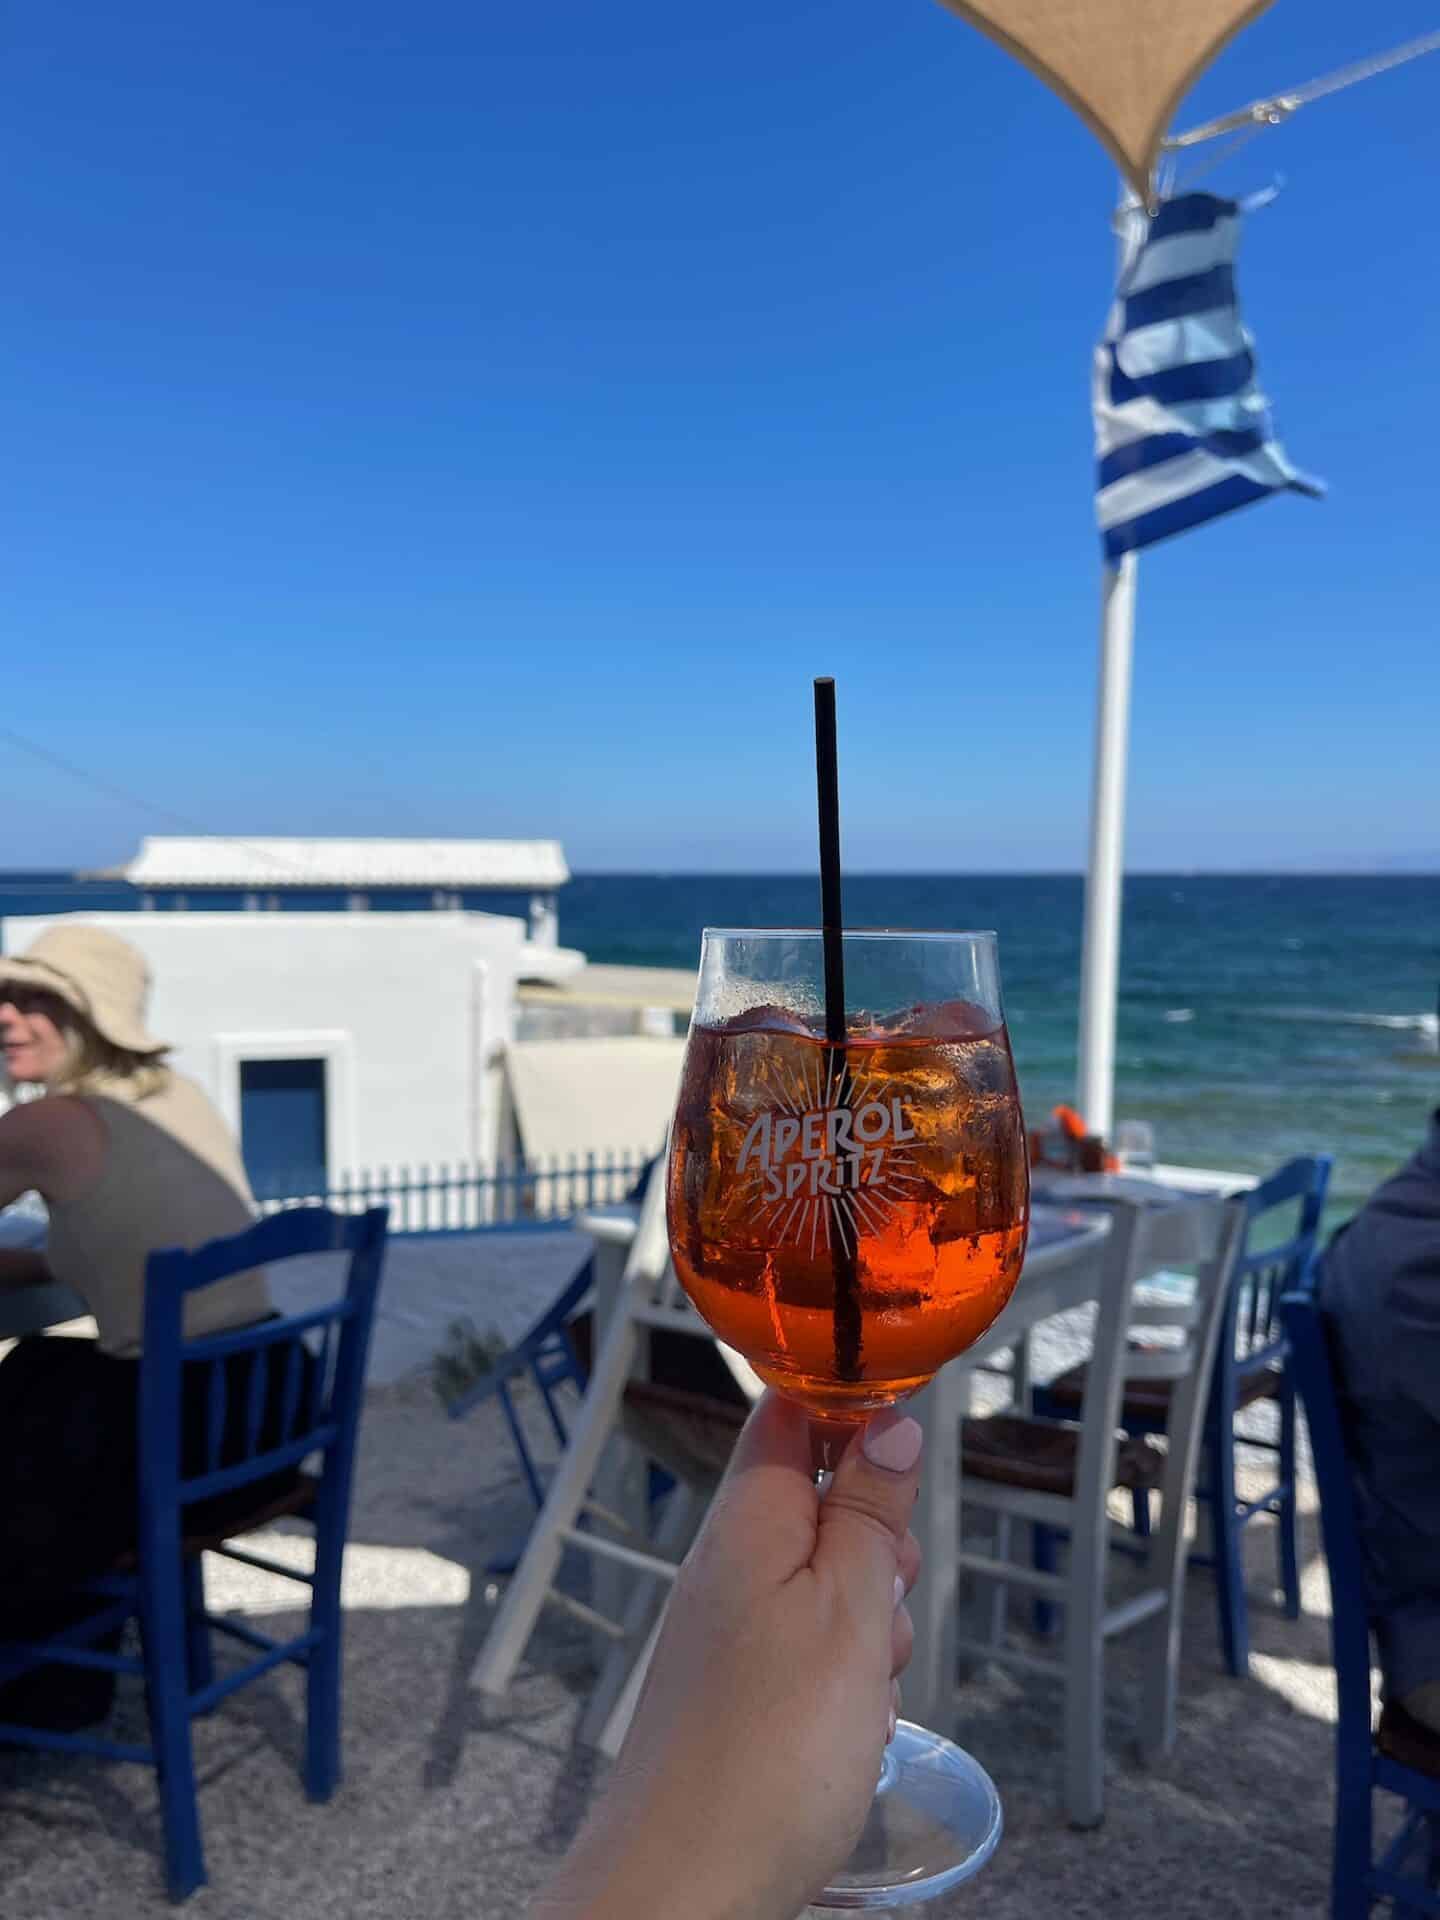 A person holding a glass of Aperol Spritz with a straw, in focus against a seaside taverna backdrop with a fluttering Greek flag, evoking the casual dining atmosphere in Milos.